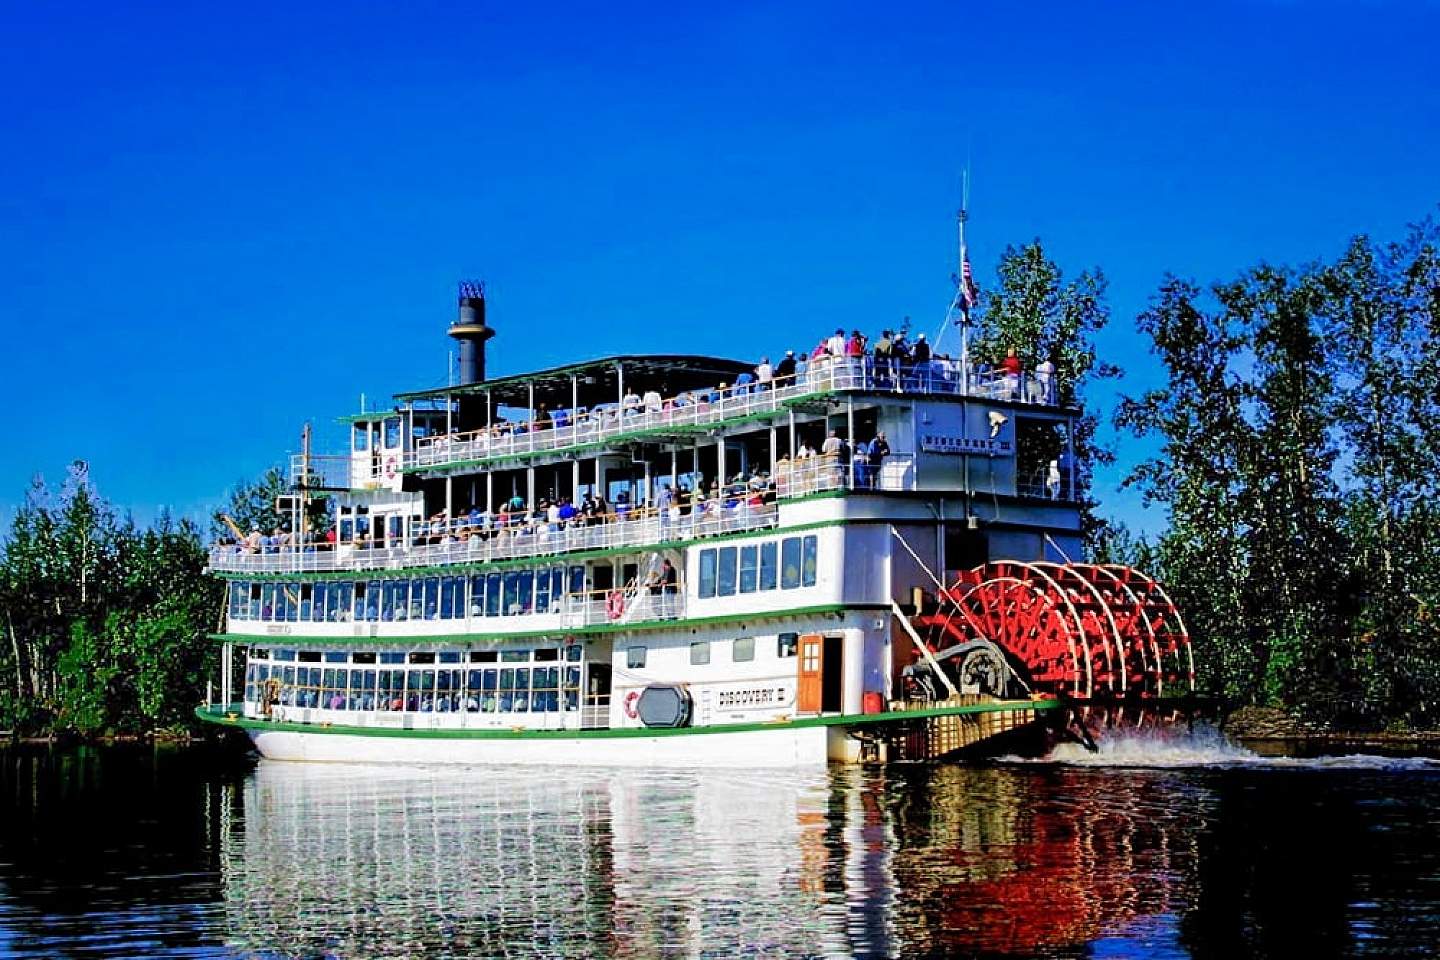 Climb on board an authentic Alaskan sternwheeler and take a journey back in time